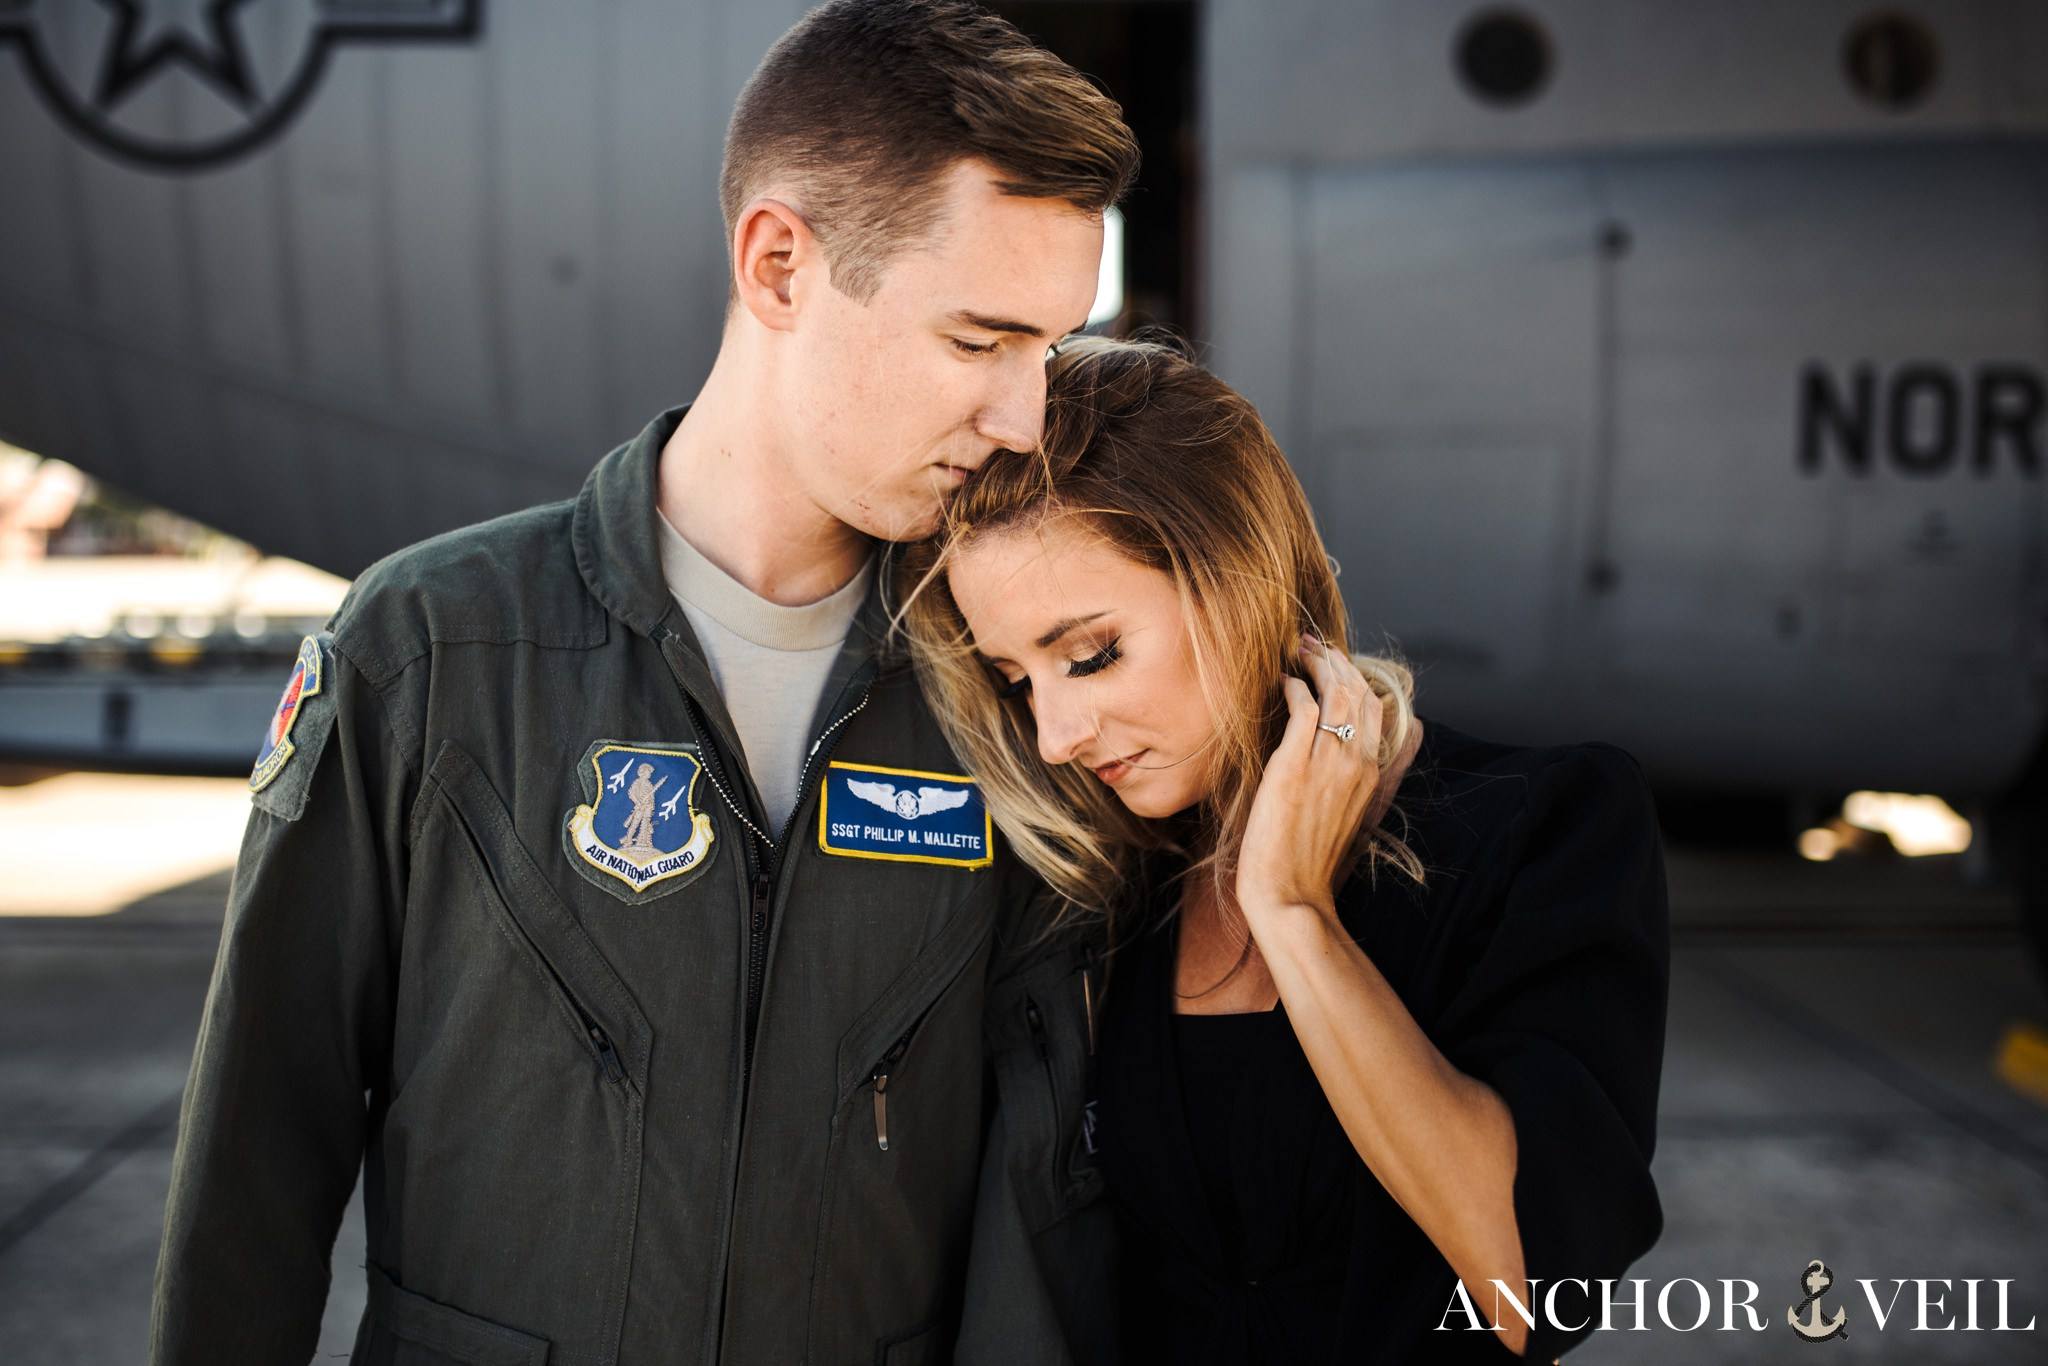 Leaning on his shoulder during the aviation themed engagement session in Charlotte NC